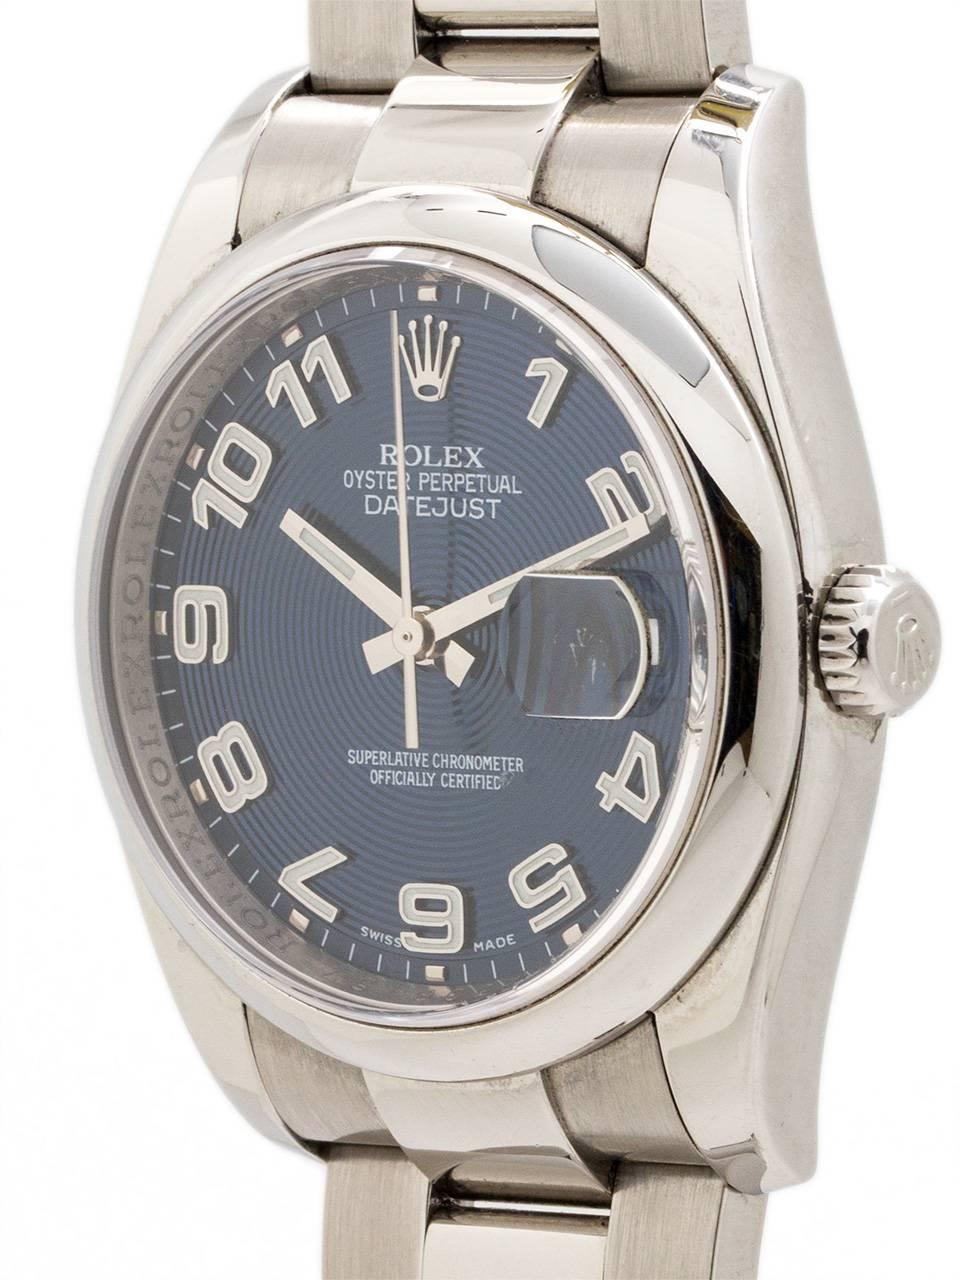 Preowned Rolex Datejust ref 16200 stainless steel circa 2002. Featuring 36mm diameter case with smooth dome bezel, sapphire crystal, and beautiful original blue sunburst dial with wrapping roman numeral indexes and silver baton hands. Powered by